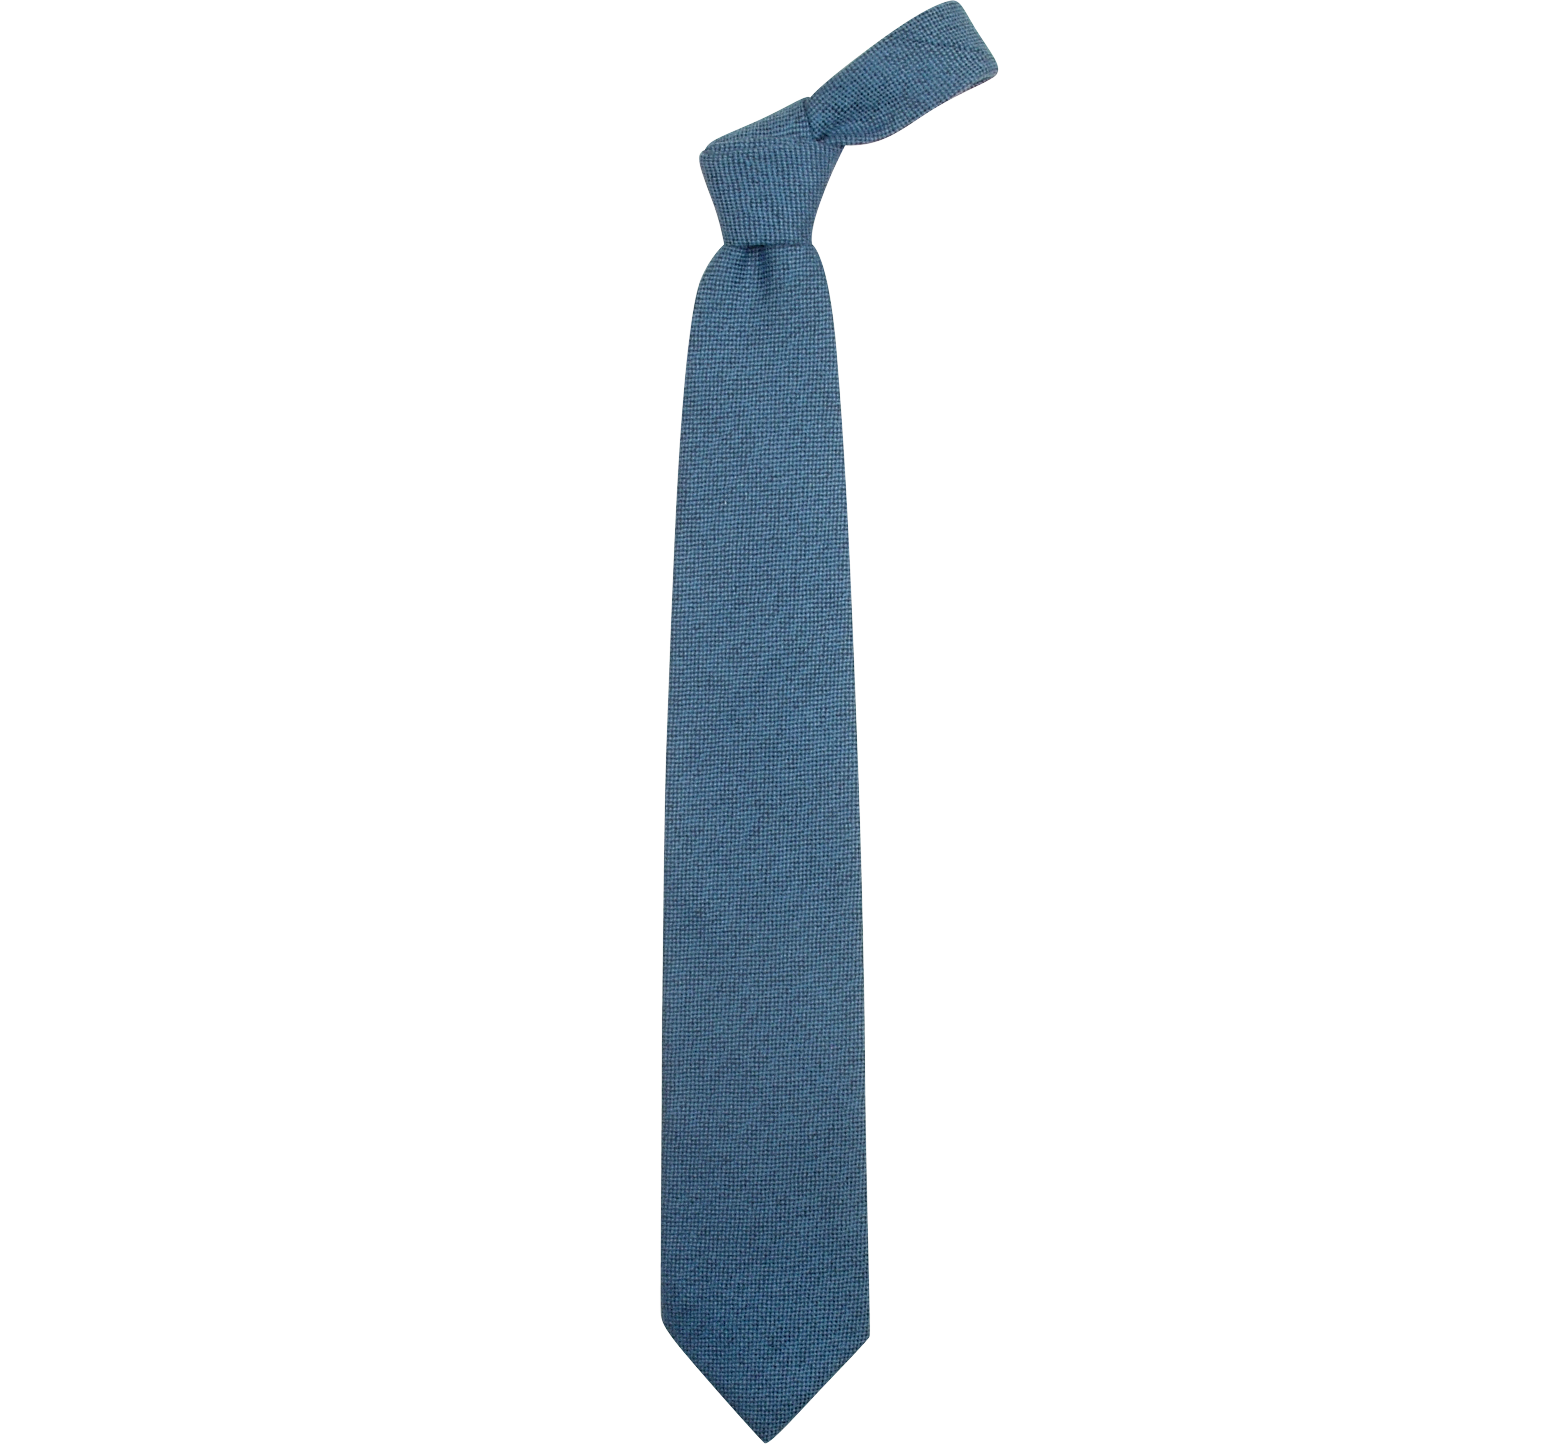 Forzieri Blue/Gray Solid Sky Blue Cashmere Tie at FORZIERI